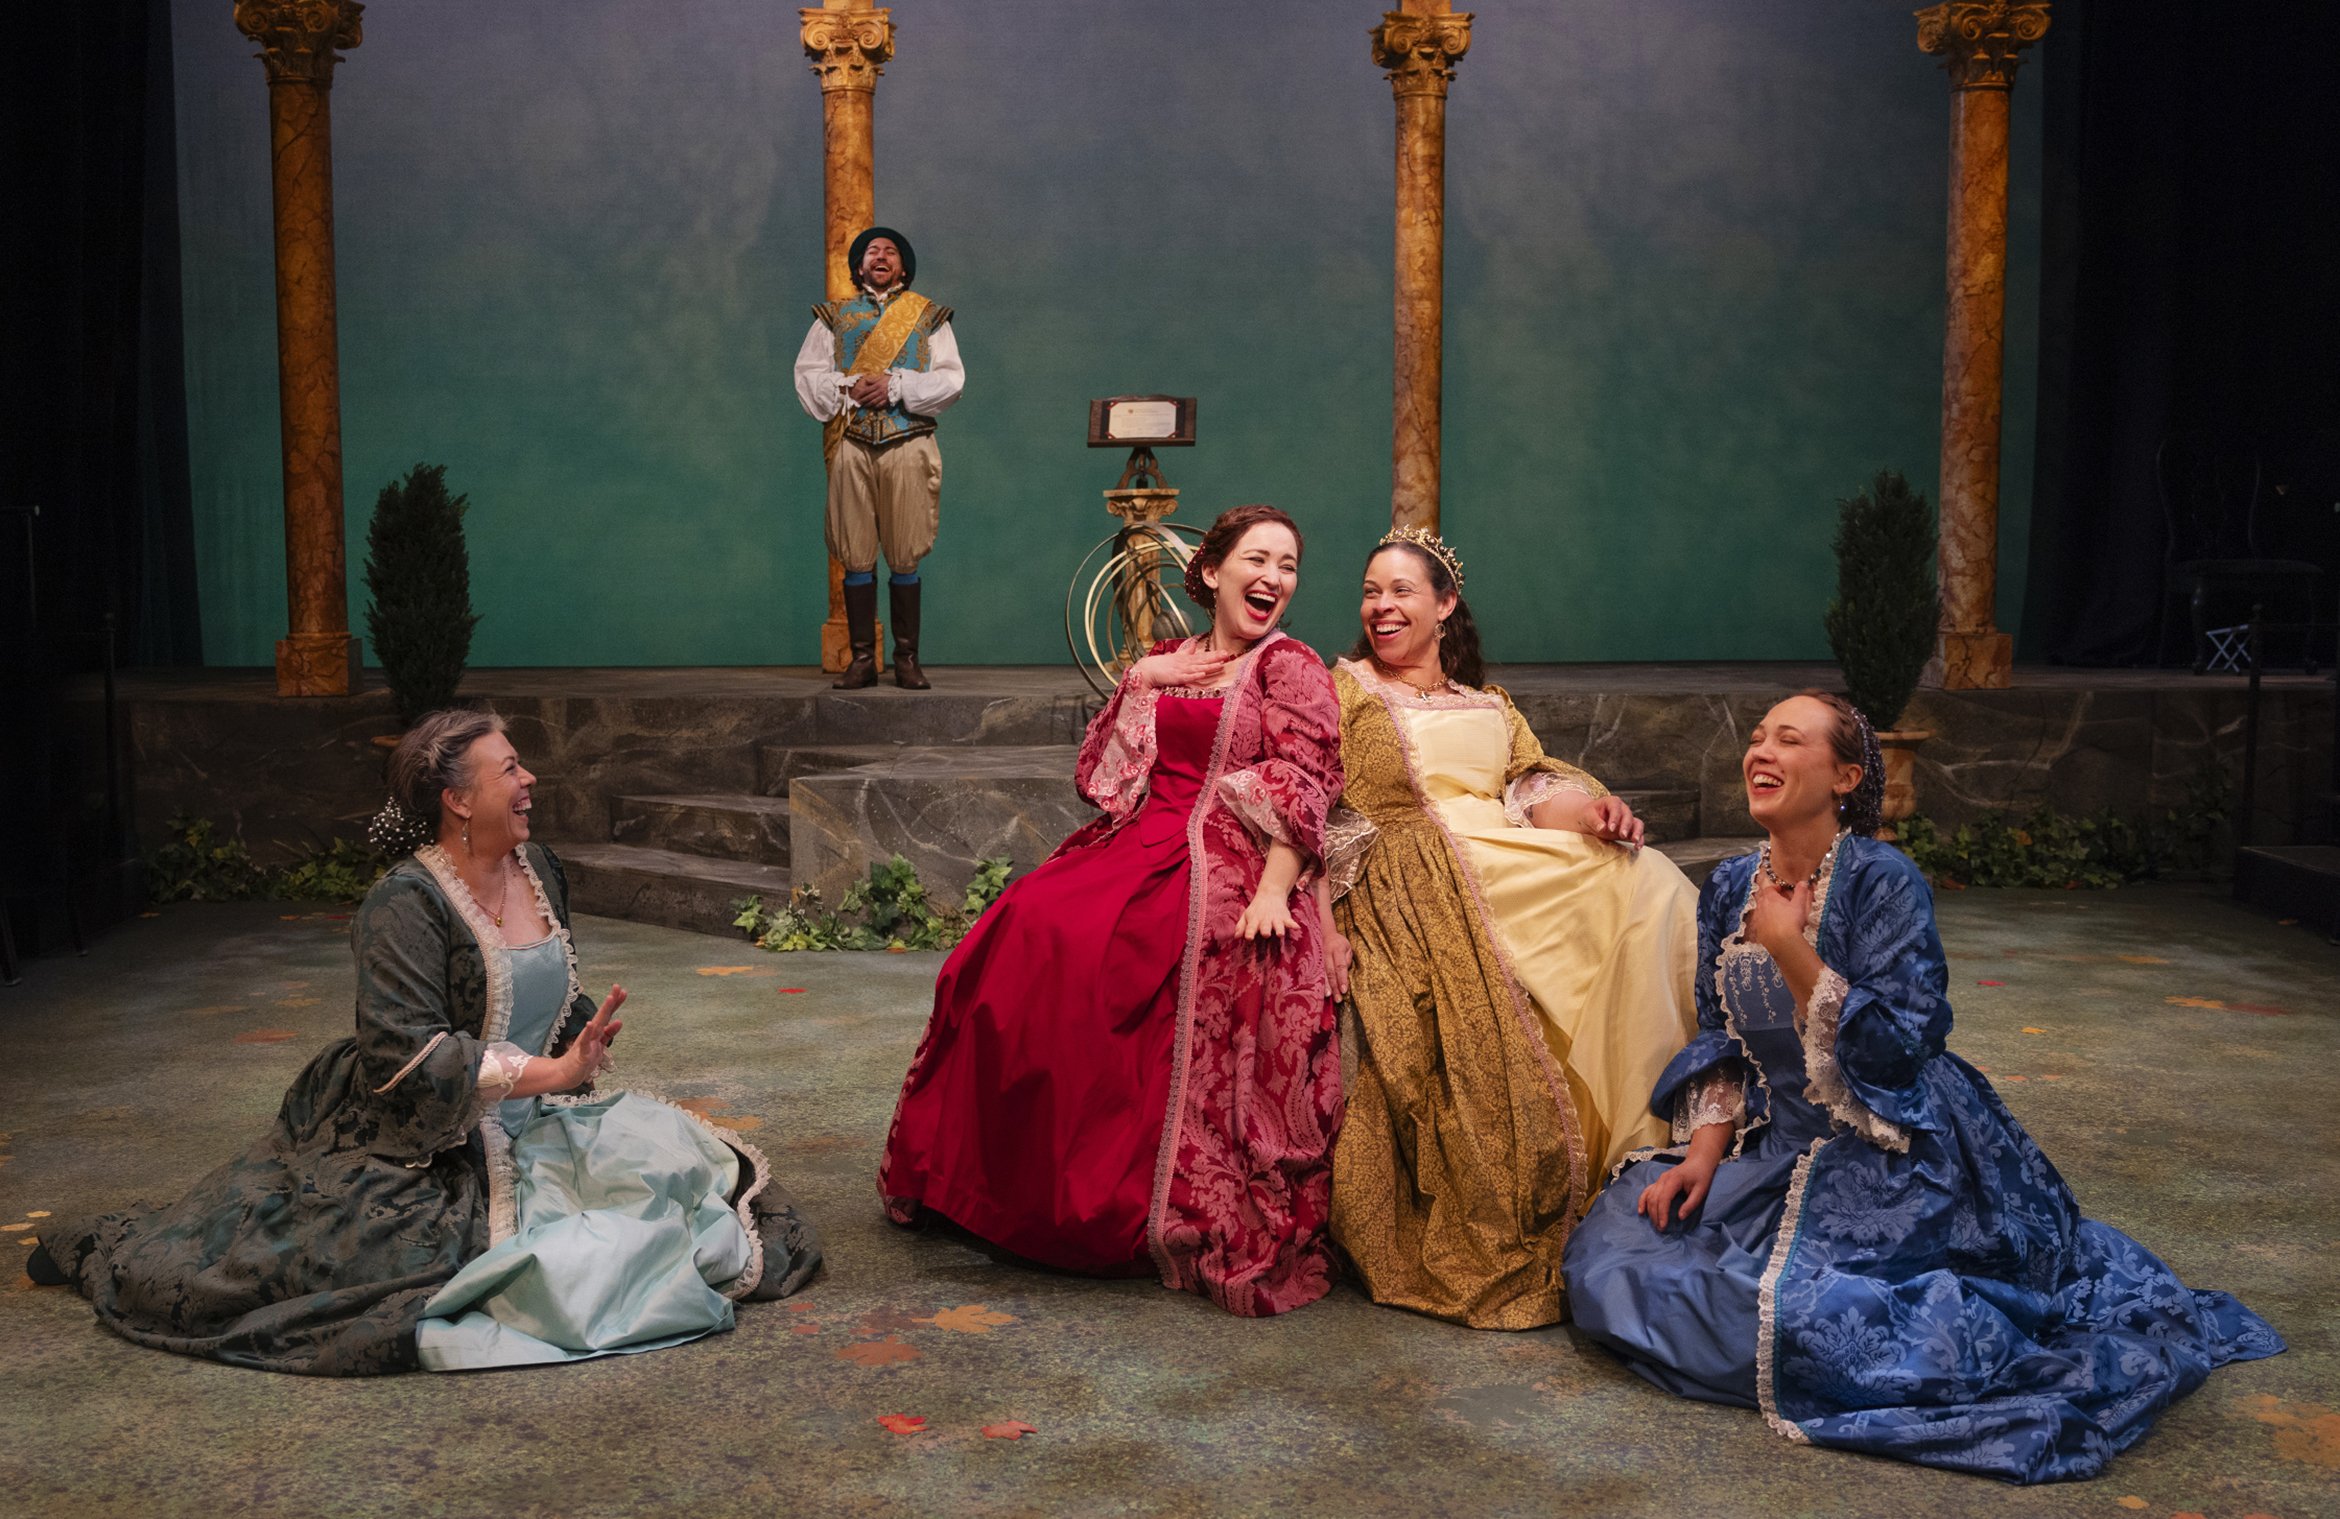 The Court of France: Chelsea Bowdren as Maria, Hunter Hnat as Boyet, Bryn Booth as Rosaline, Carley Elizabeth Preston as the Princess of France, Sophie Gibson Rush as Katharine. Photo by Tim Fuller.